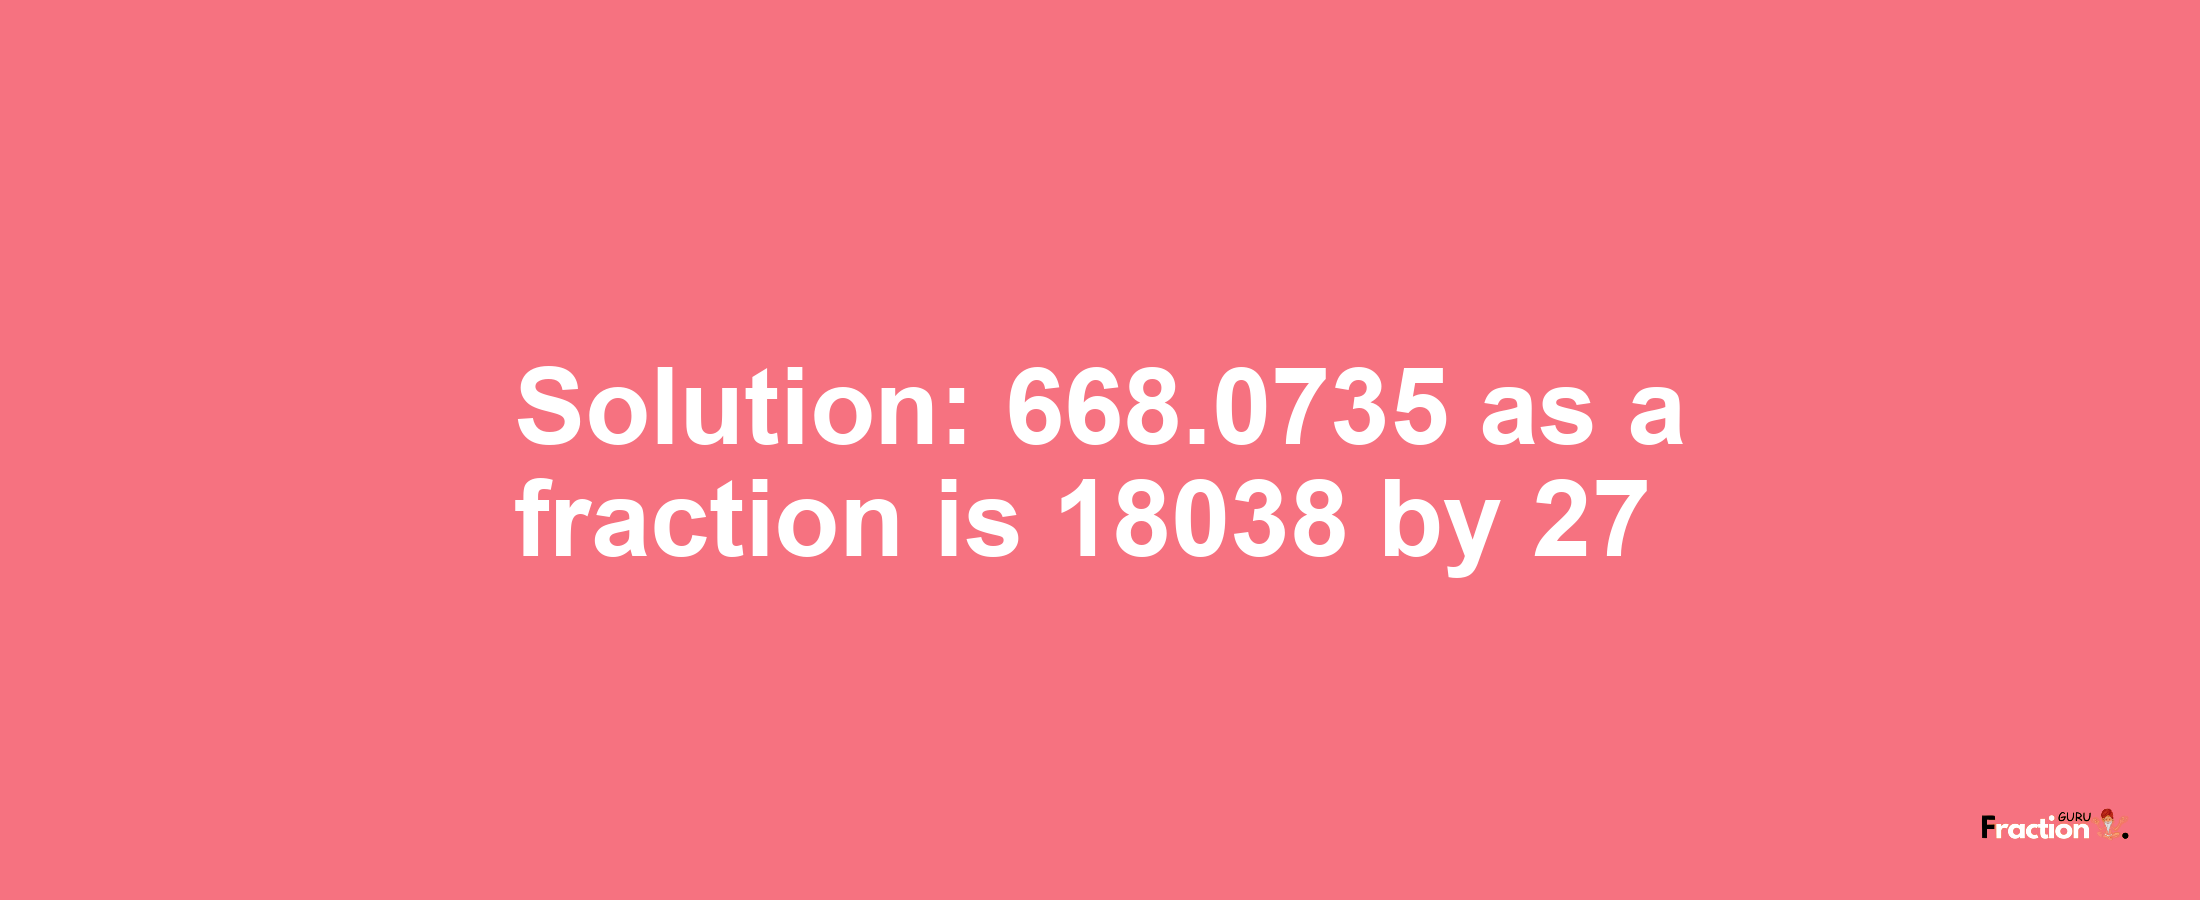 Solution:668.0735 as a fraction is 18038/27